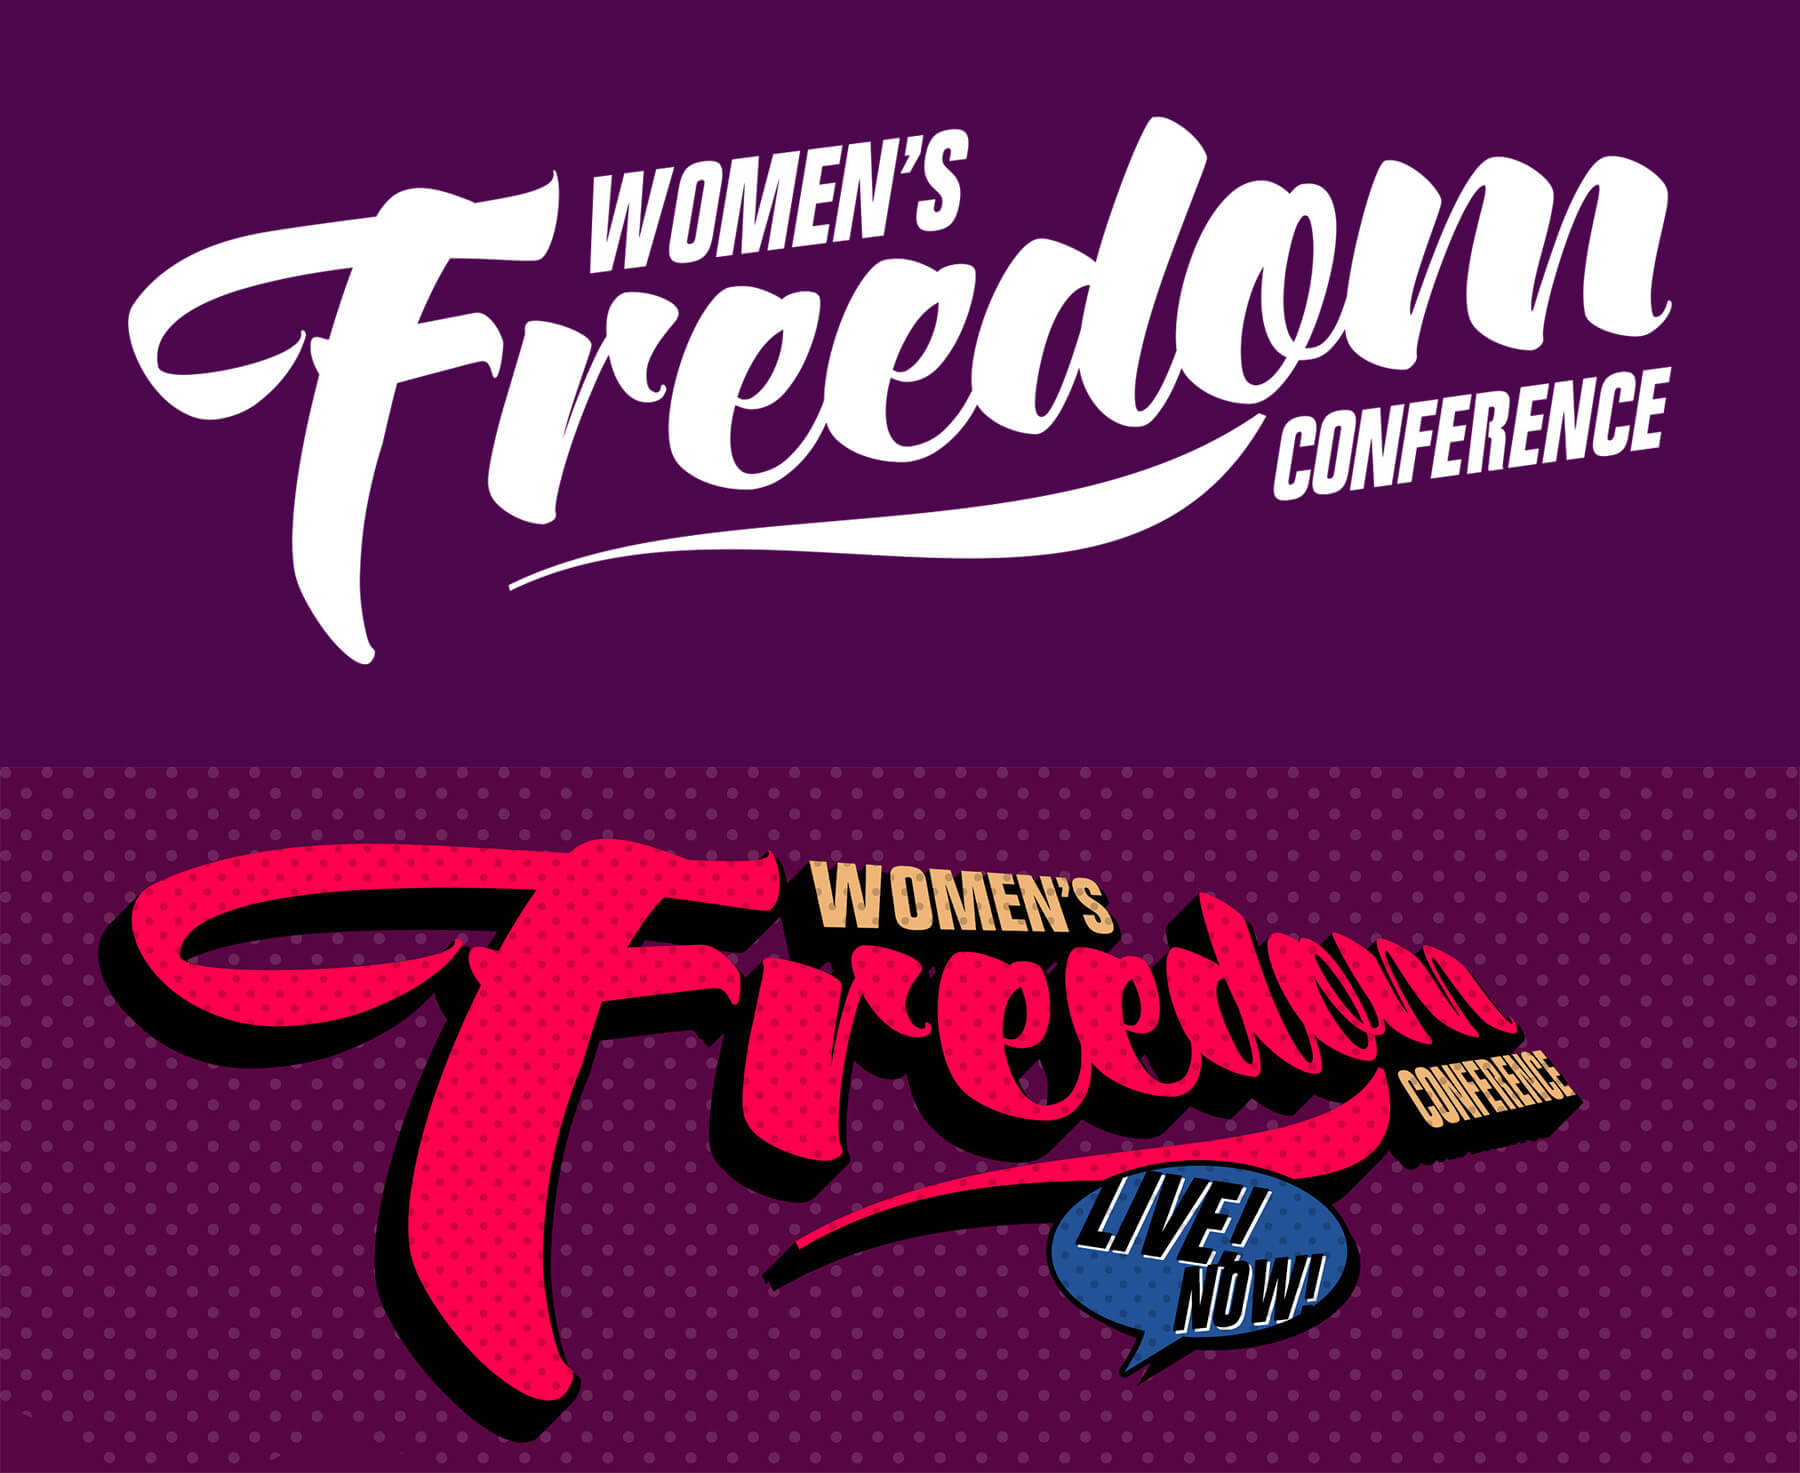 Women's Freedom Conference logos